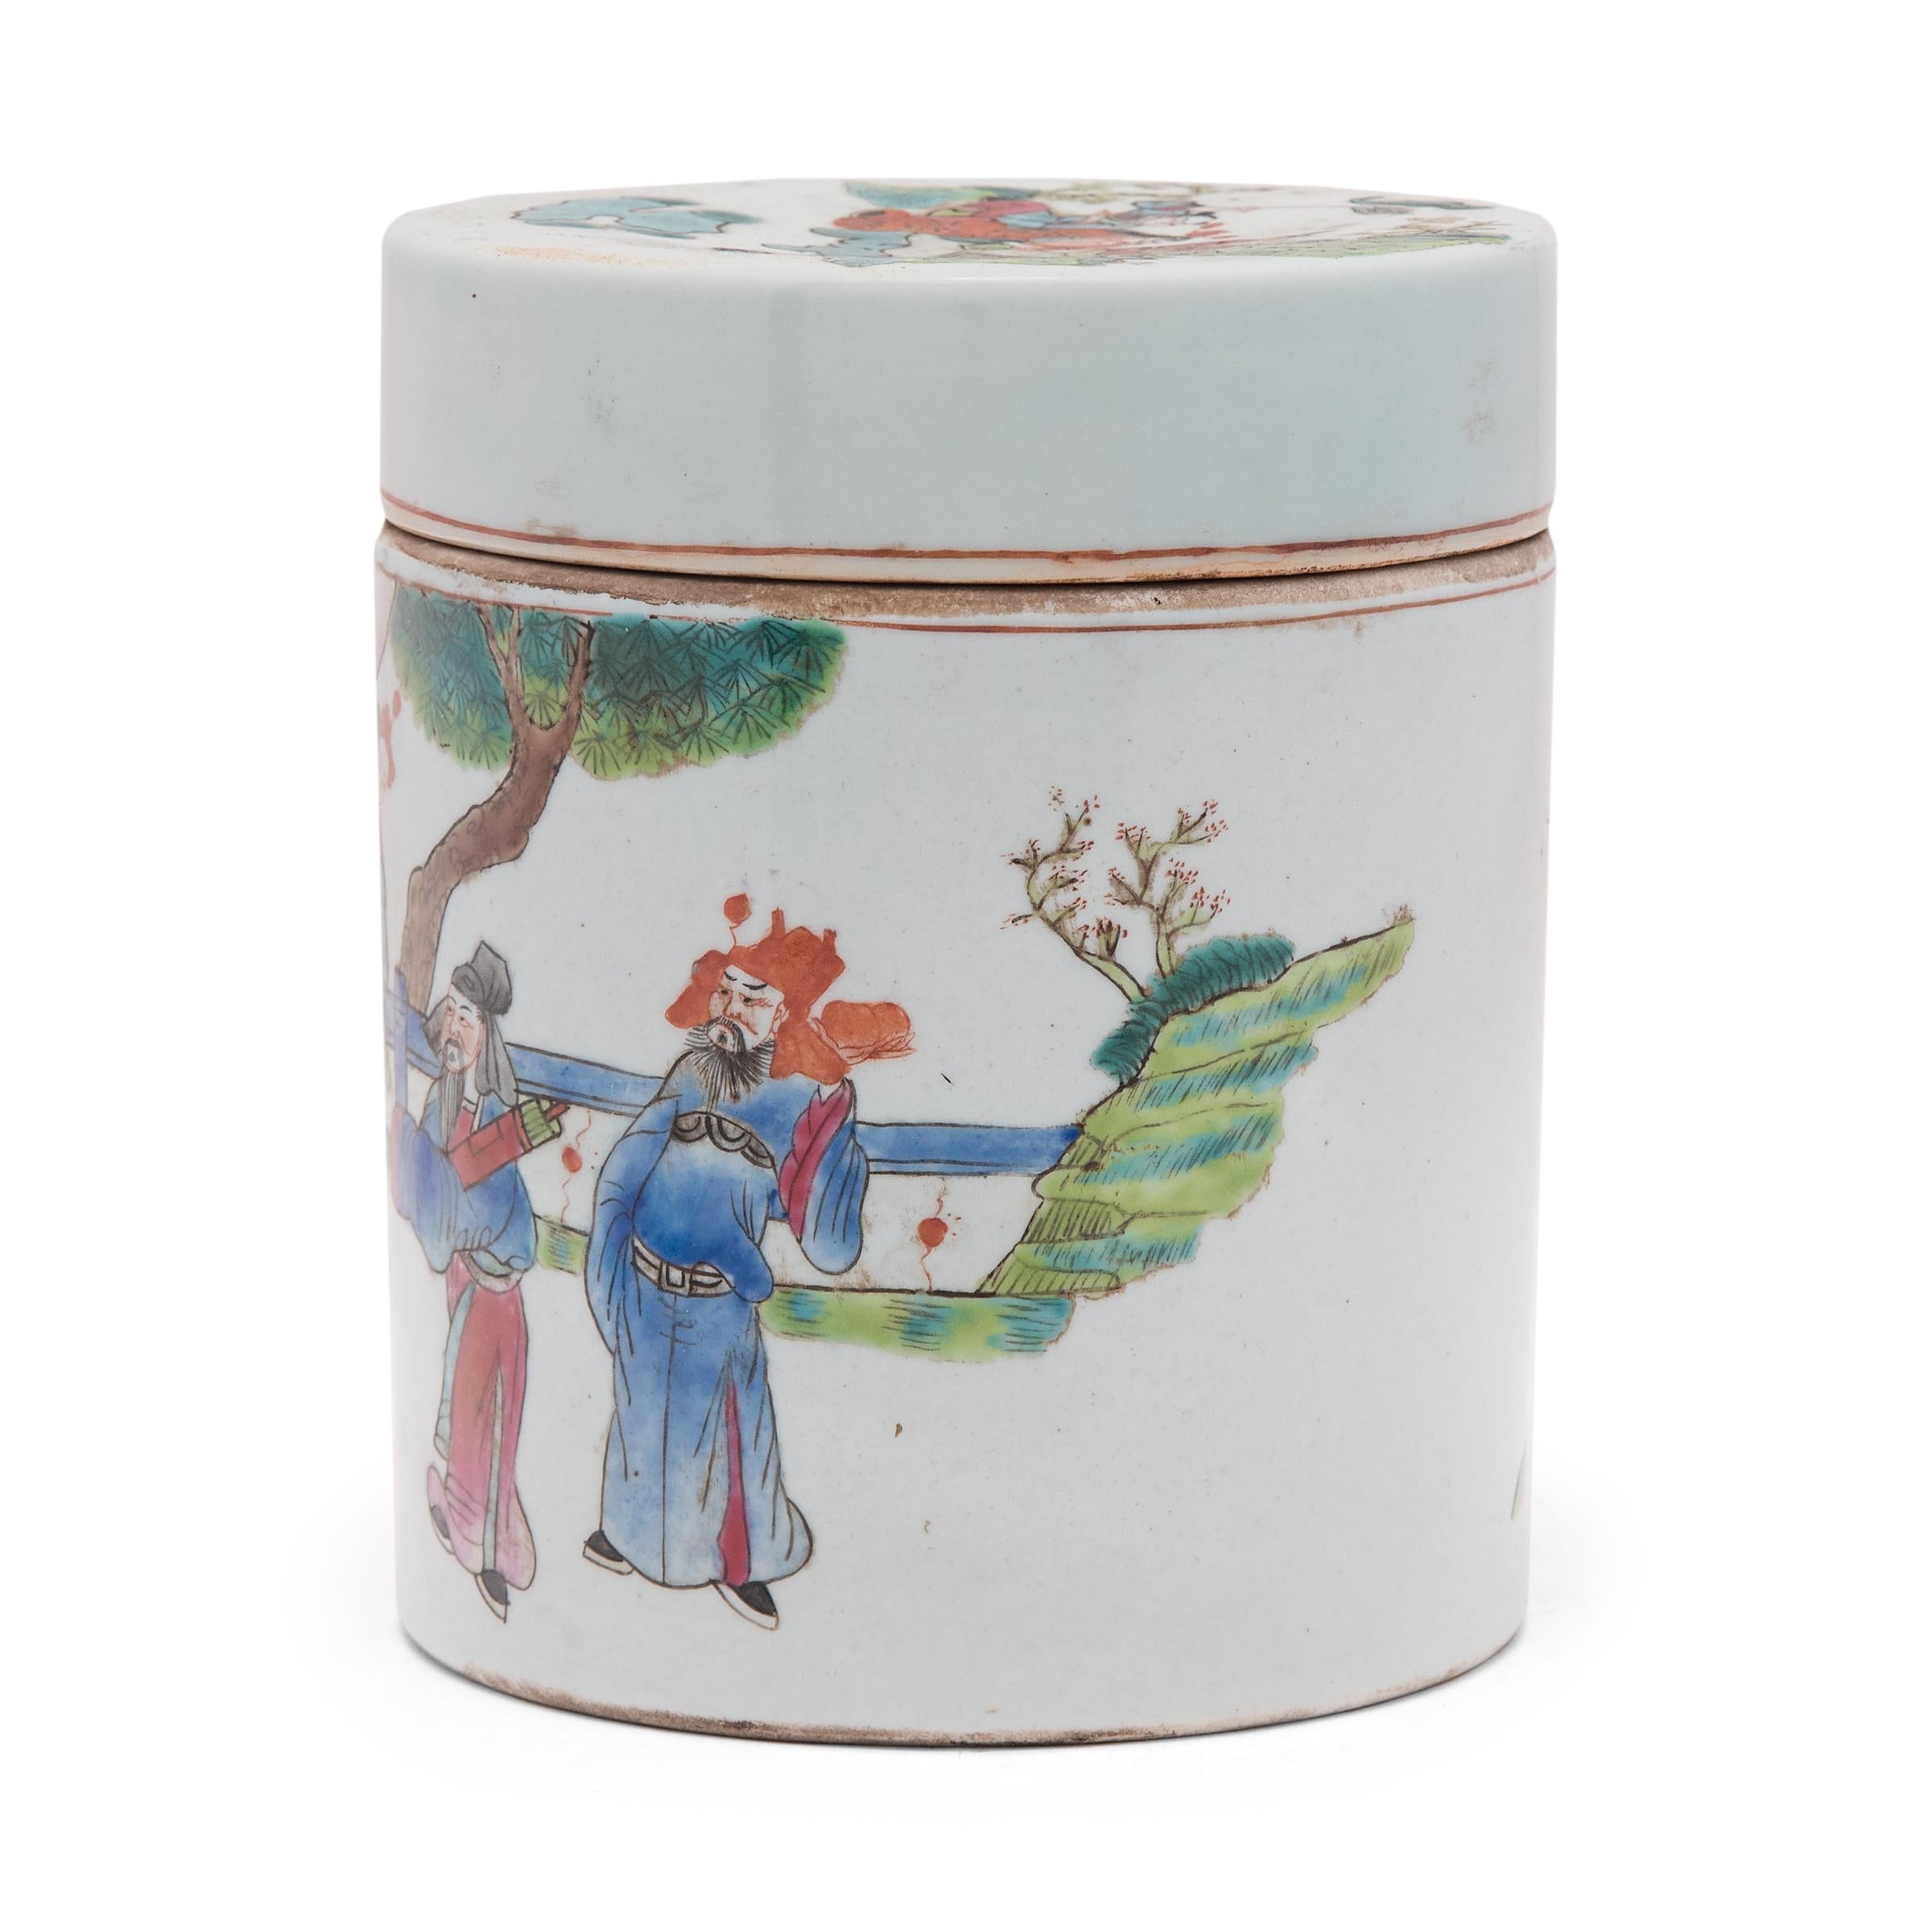 This porcelain jar is decorated in a style of overglaze enameling known as 